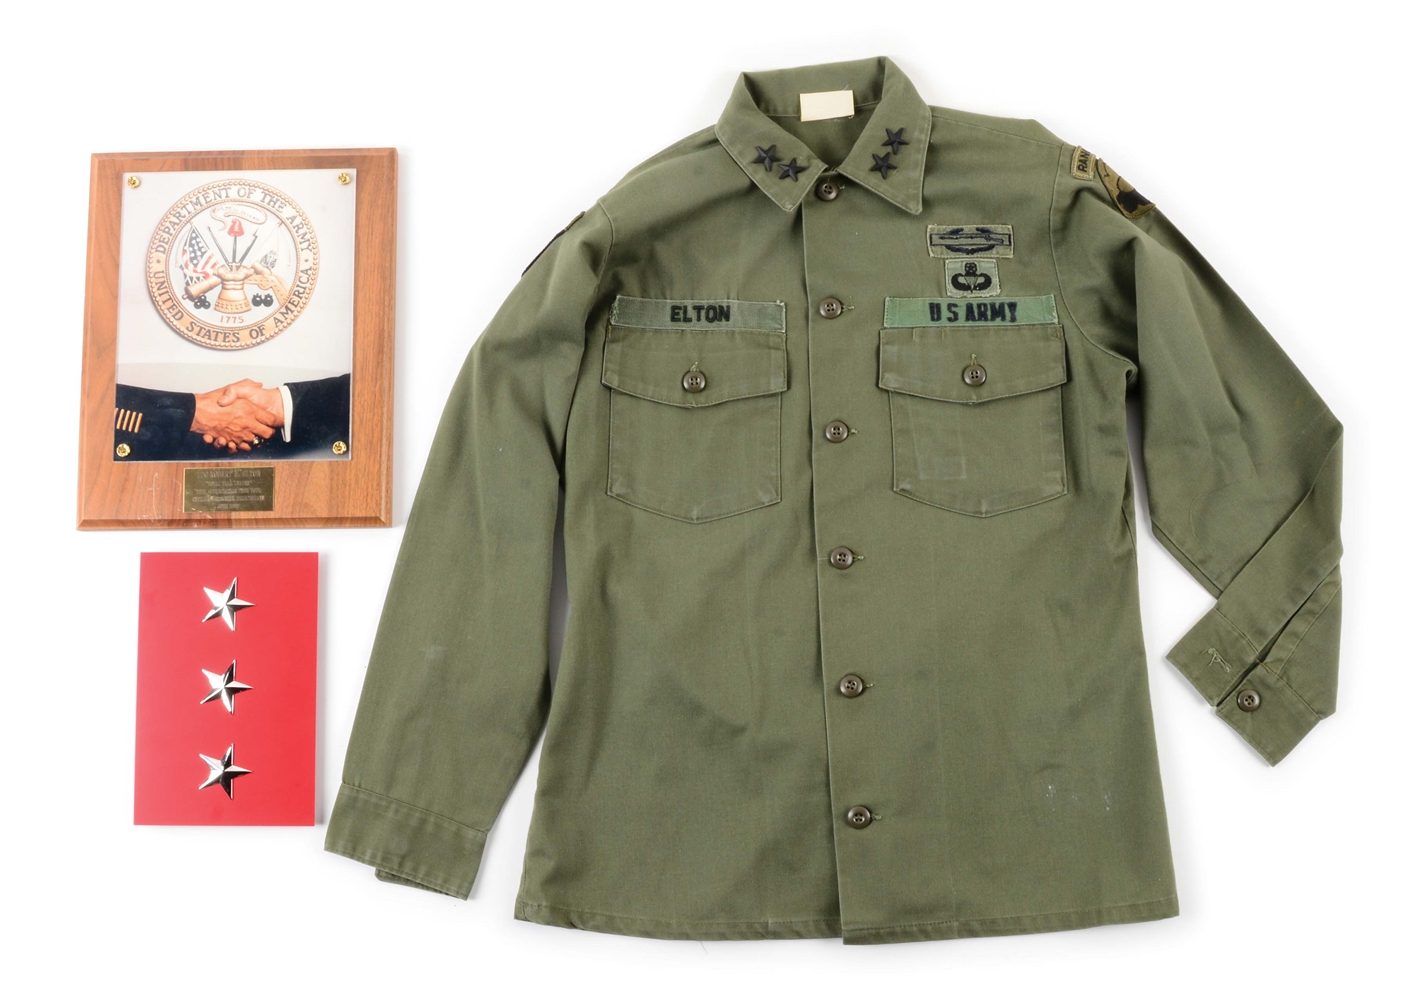 US COLD WAR LT. GENERAL ROBERT M. ELTON FATIGUE JACKET, LICENSE PLATE, AND PLAQUE GROUPING.